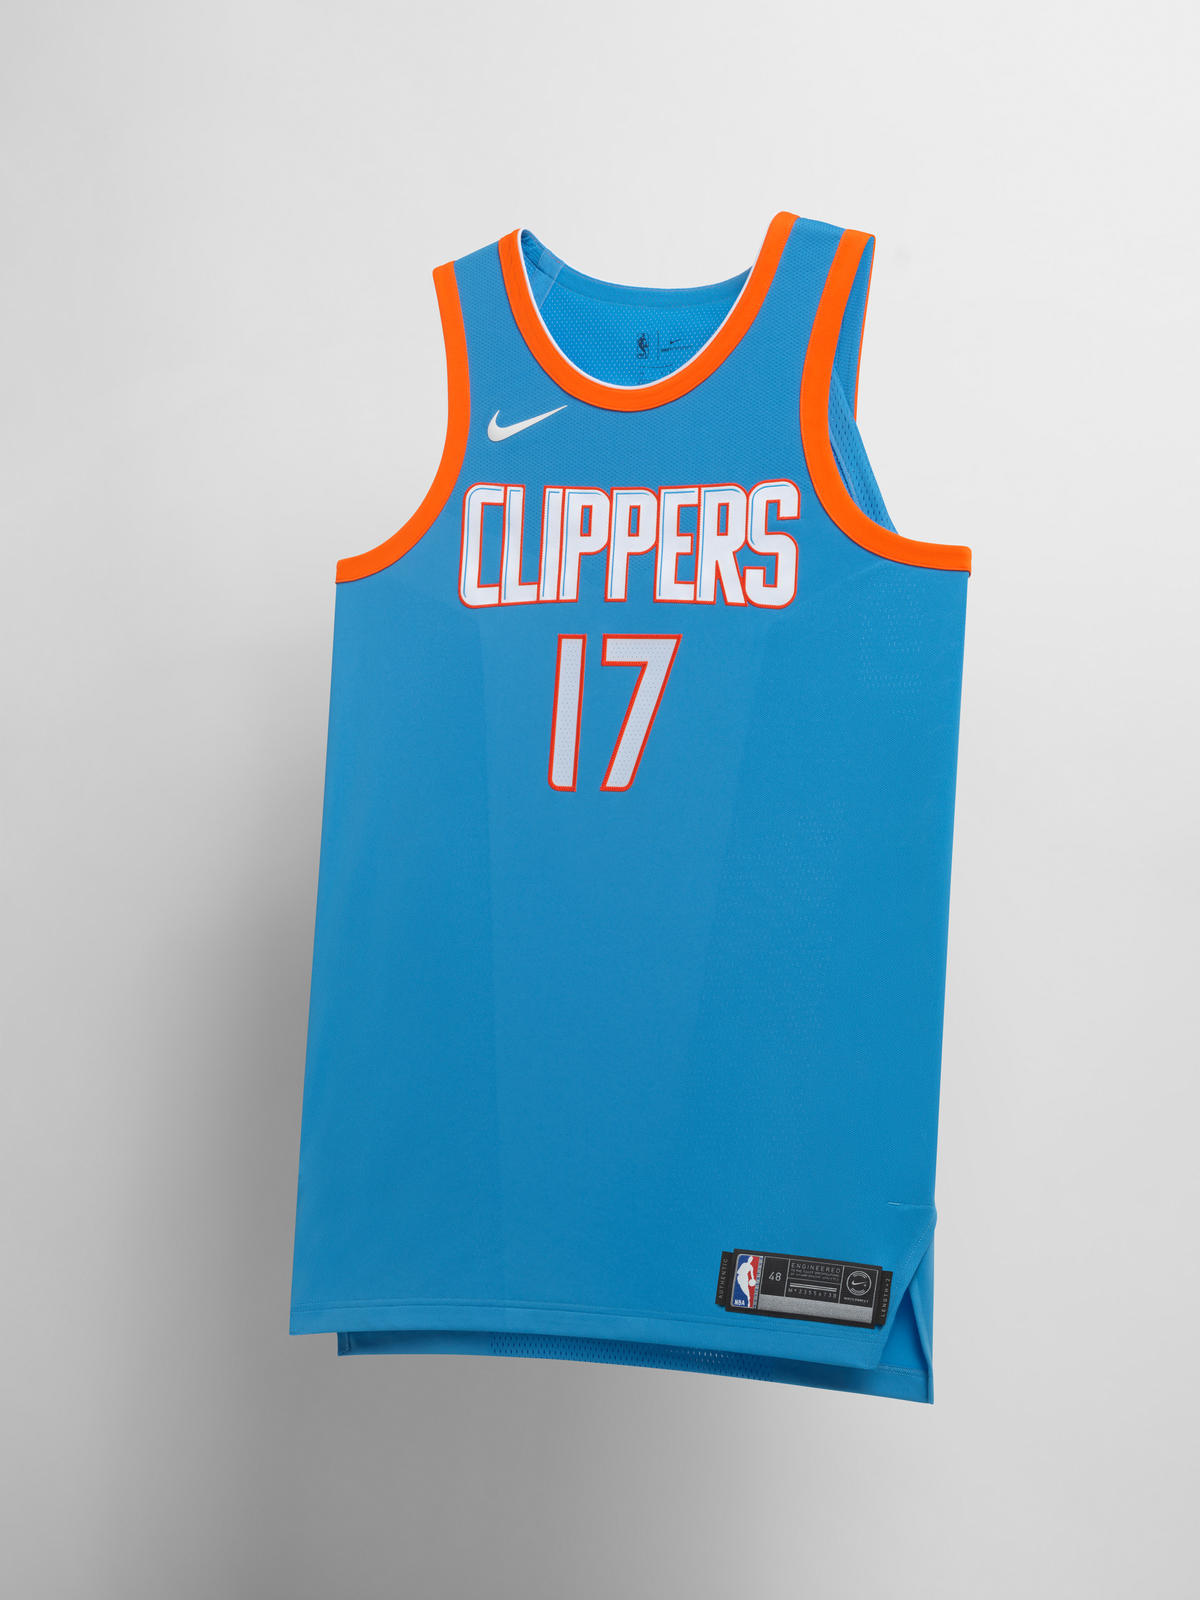 Ranking all 30 of the new NBA City uniforms, from worst to first